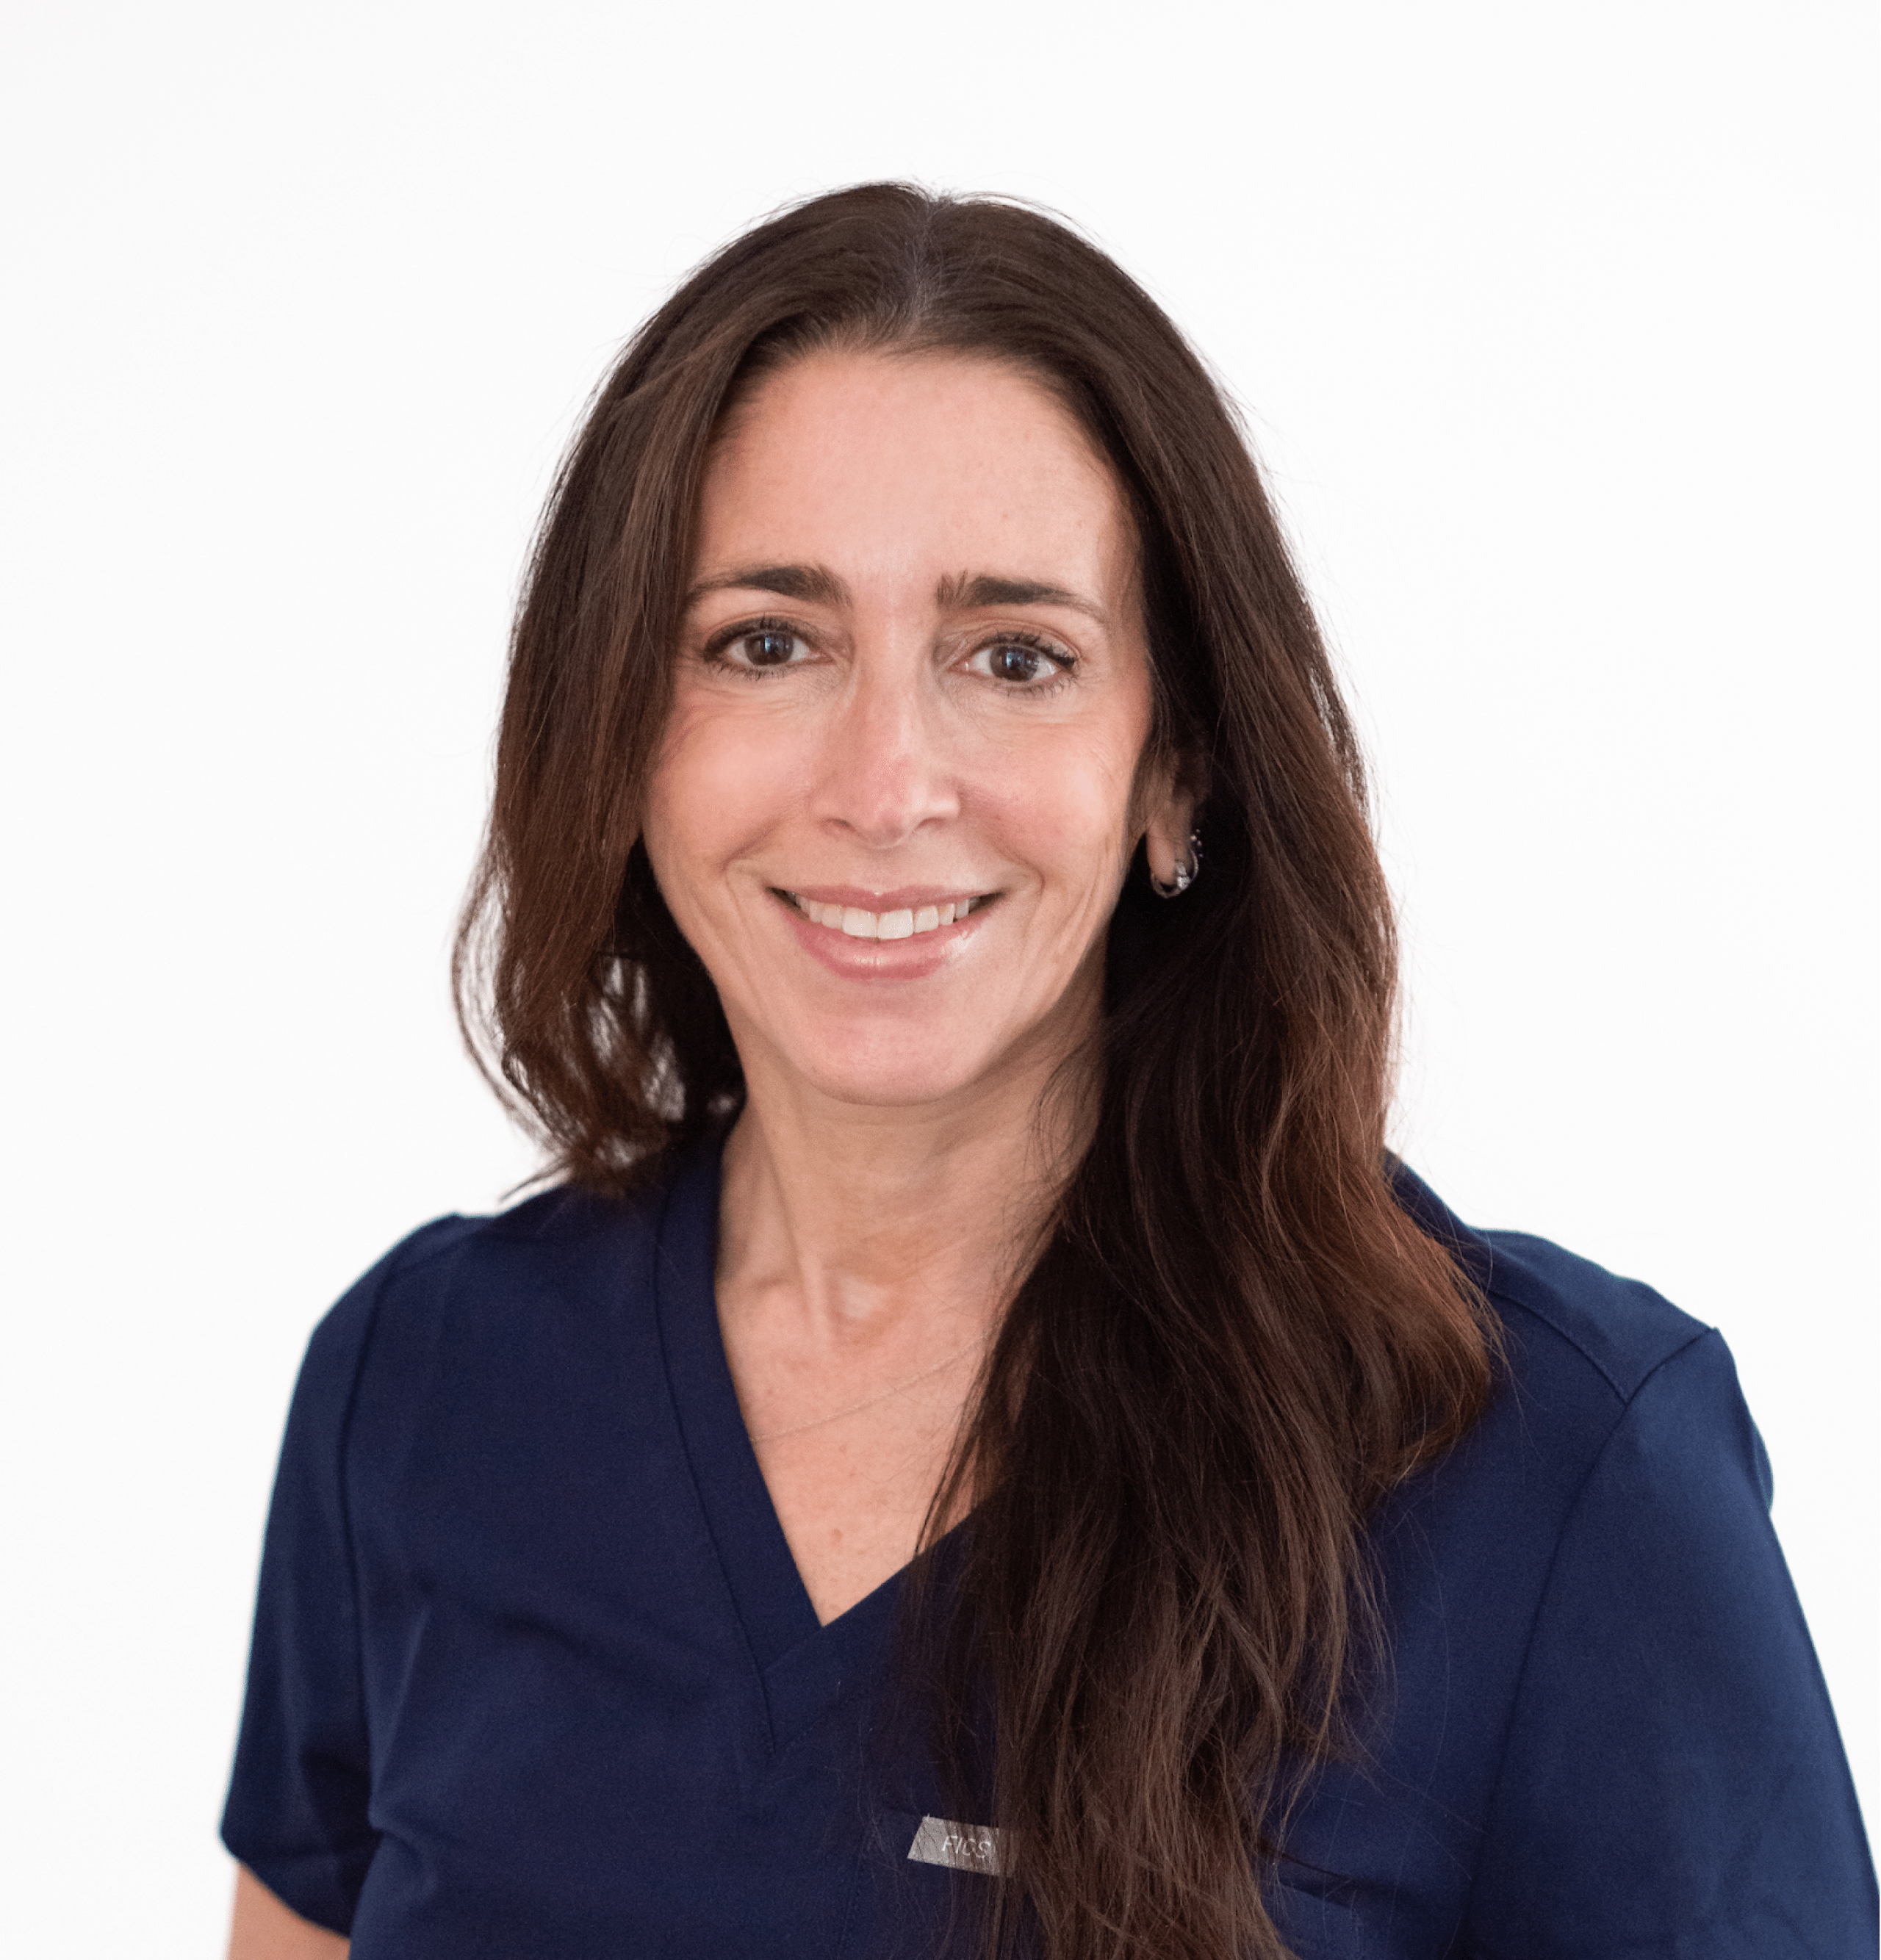 Dr. Sharon Eder, DDS, completed her B.S. degree at Cornell University in Ithaca, NY. She received her Doctorate of Dental Surgery at NYU College of Dentistry. She completed a general practice residency and a residency in Orthodontics and Dentofacial Orthopedics at Montefiore Medical Center in Bronx, NY. Areas of practice: Adult Orthodontics, Pediatric Orthodontics, Invisalign Gold Plus Provider, Ceramic Braces, Traditional Braces.